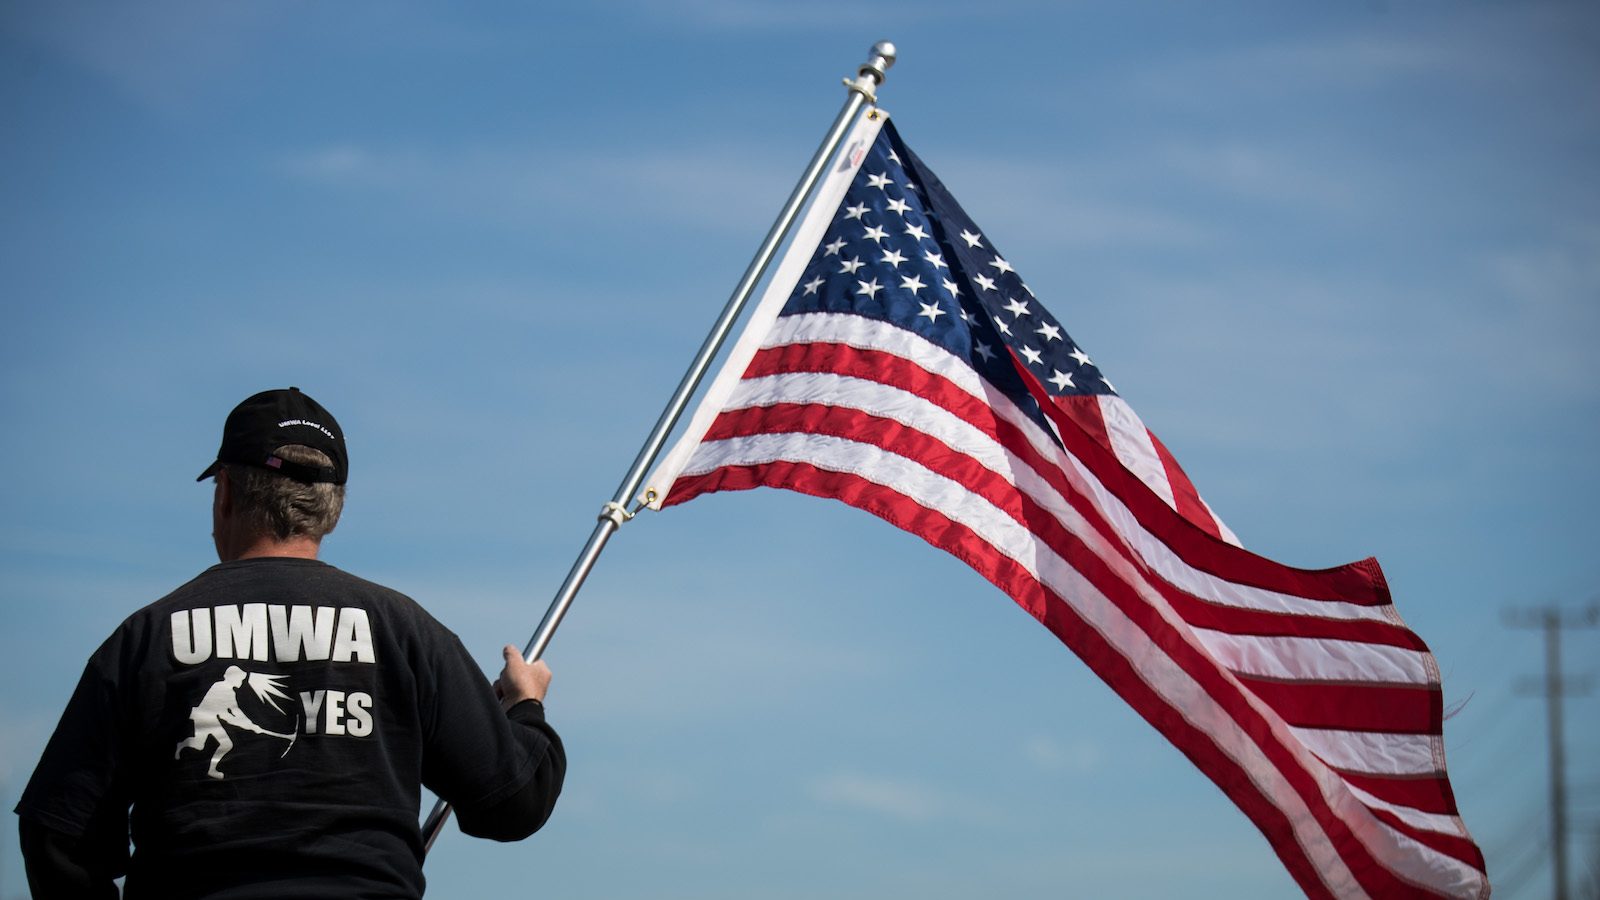 A coal miners' union member in a black shirt with white writing on the back holds an American flag before the start of a campaign rally with United Mine Workers of America.